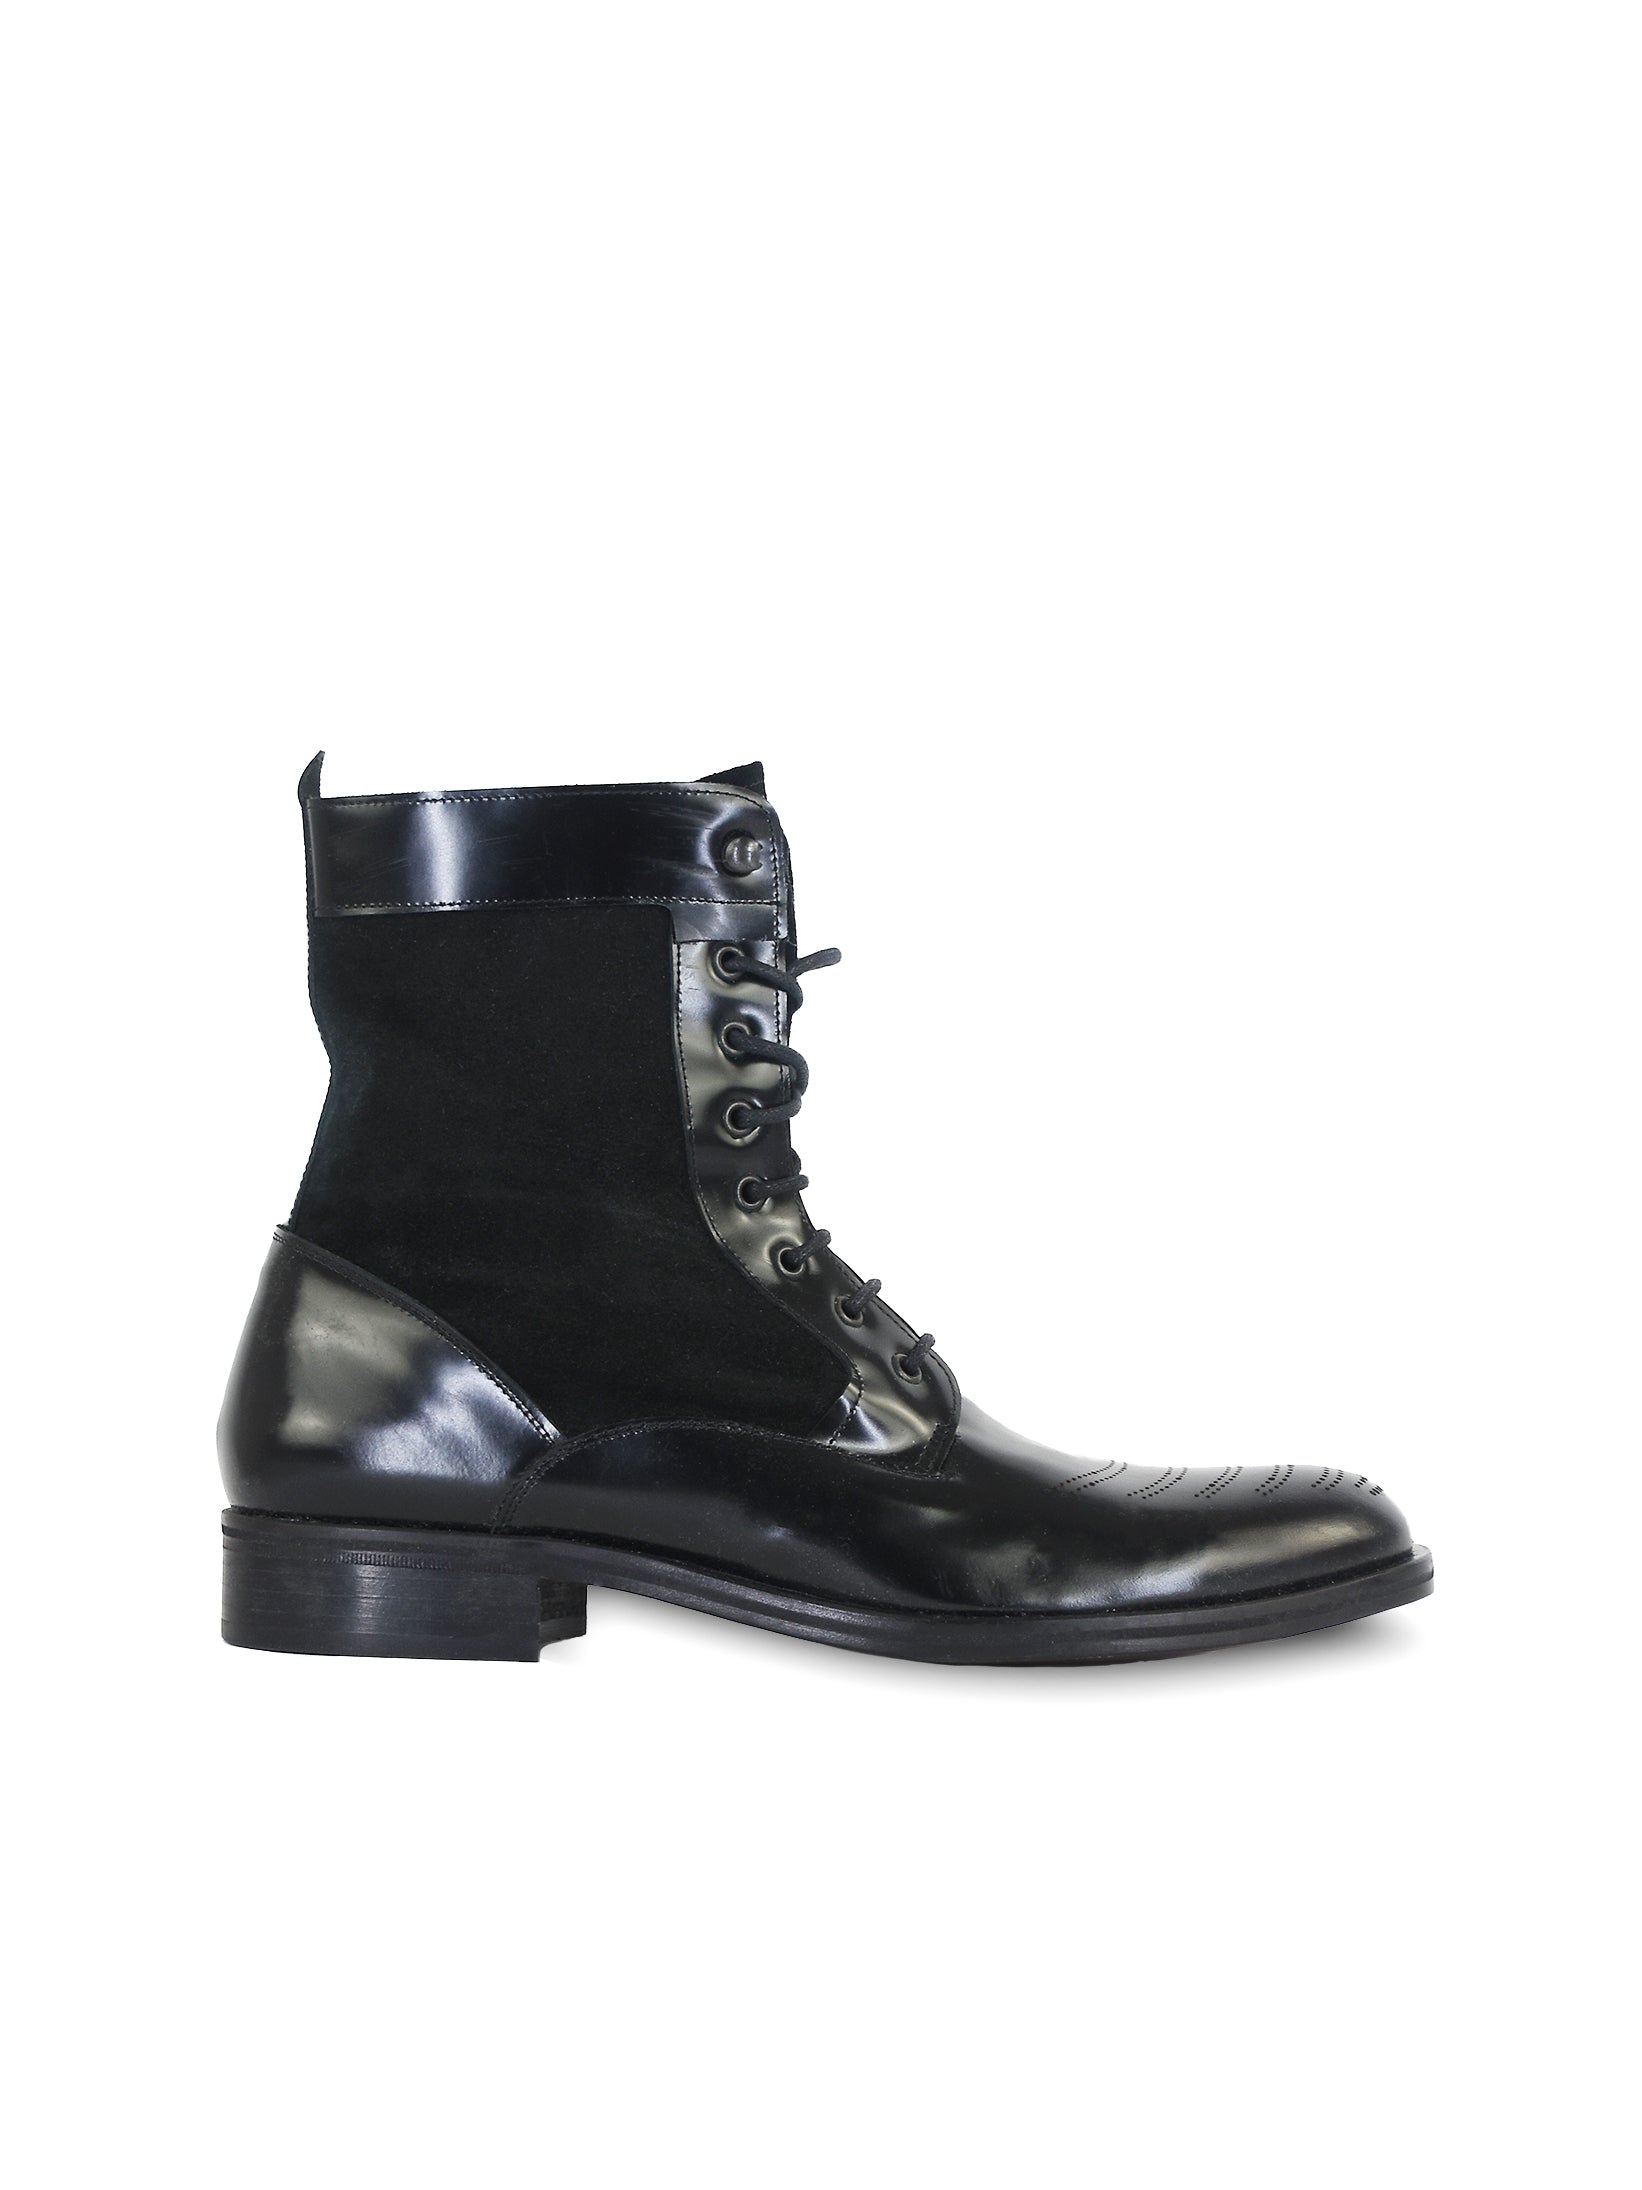 UNCONDITIONAL BLACK PATENT LEATHER AND SUEDE LACE UP DRESS BOOT